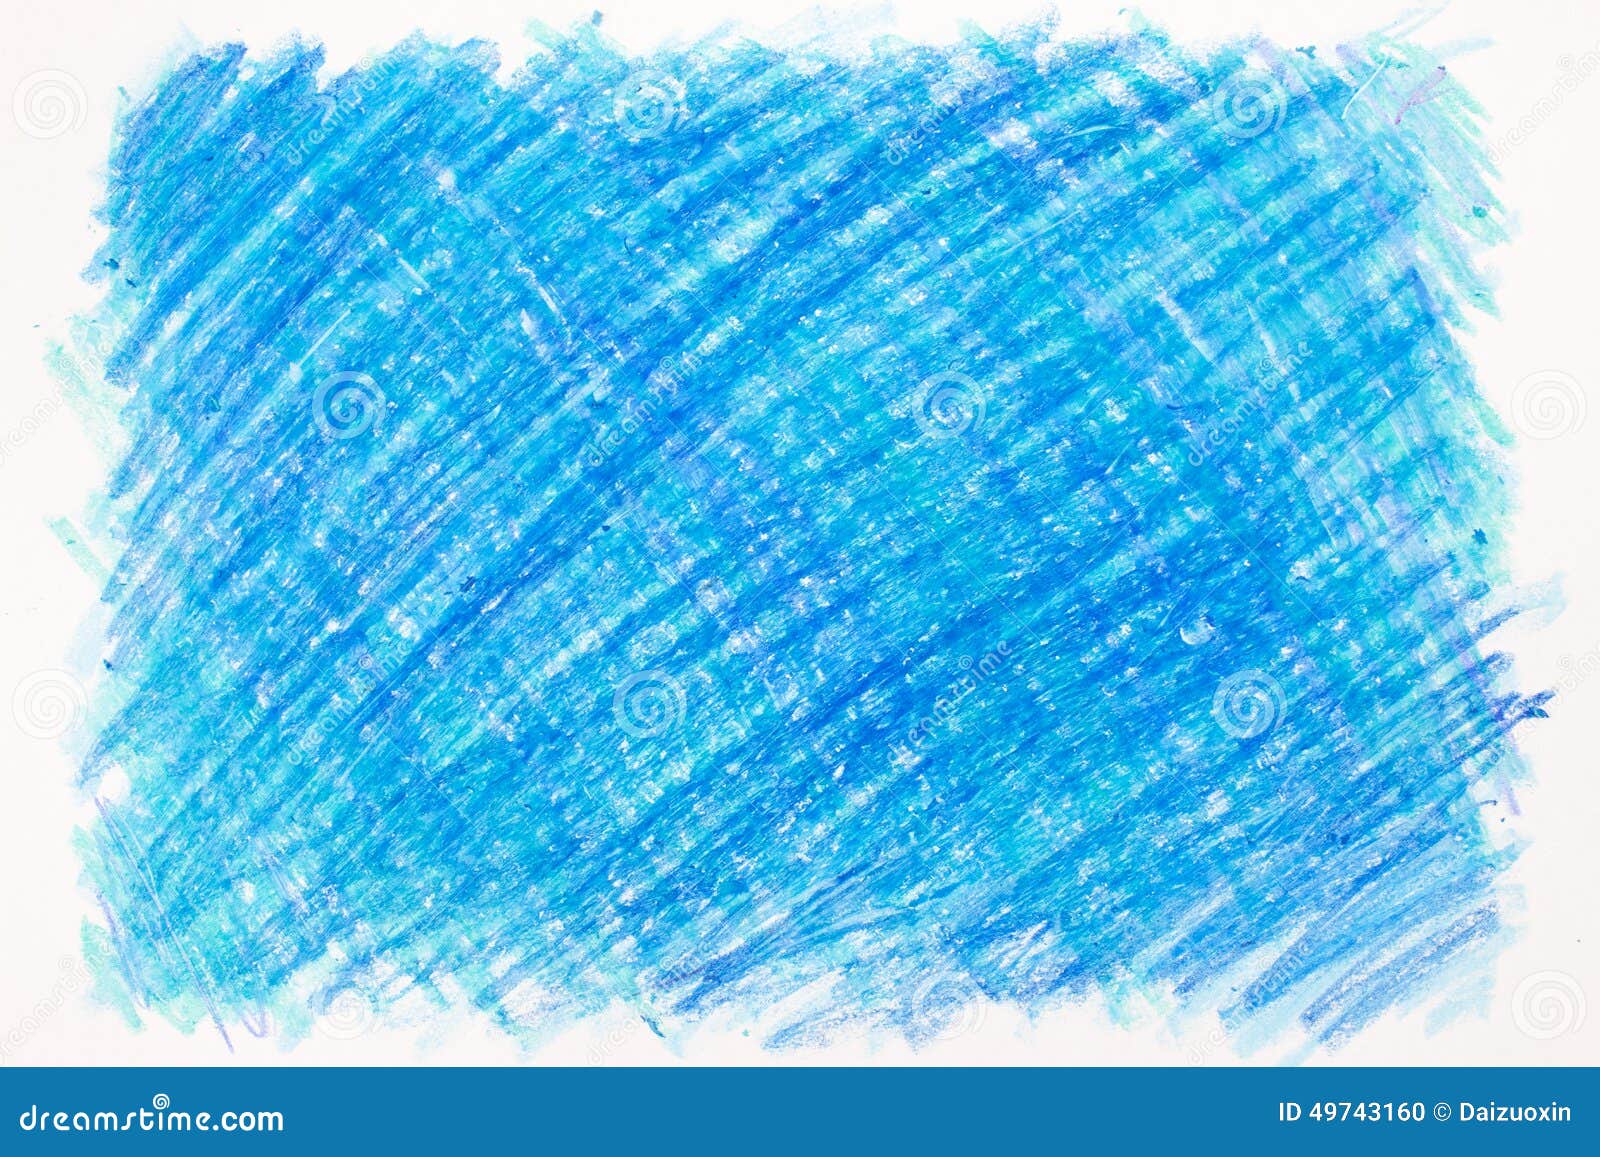 crayon scribble background